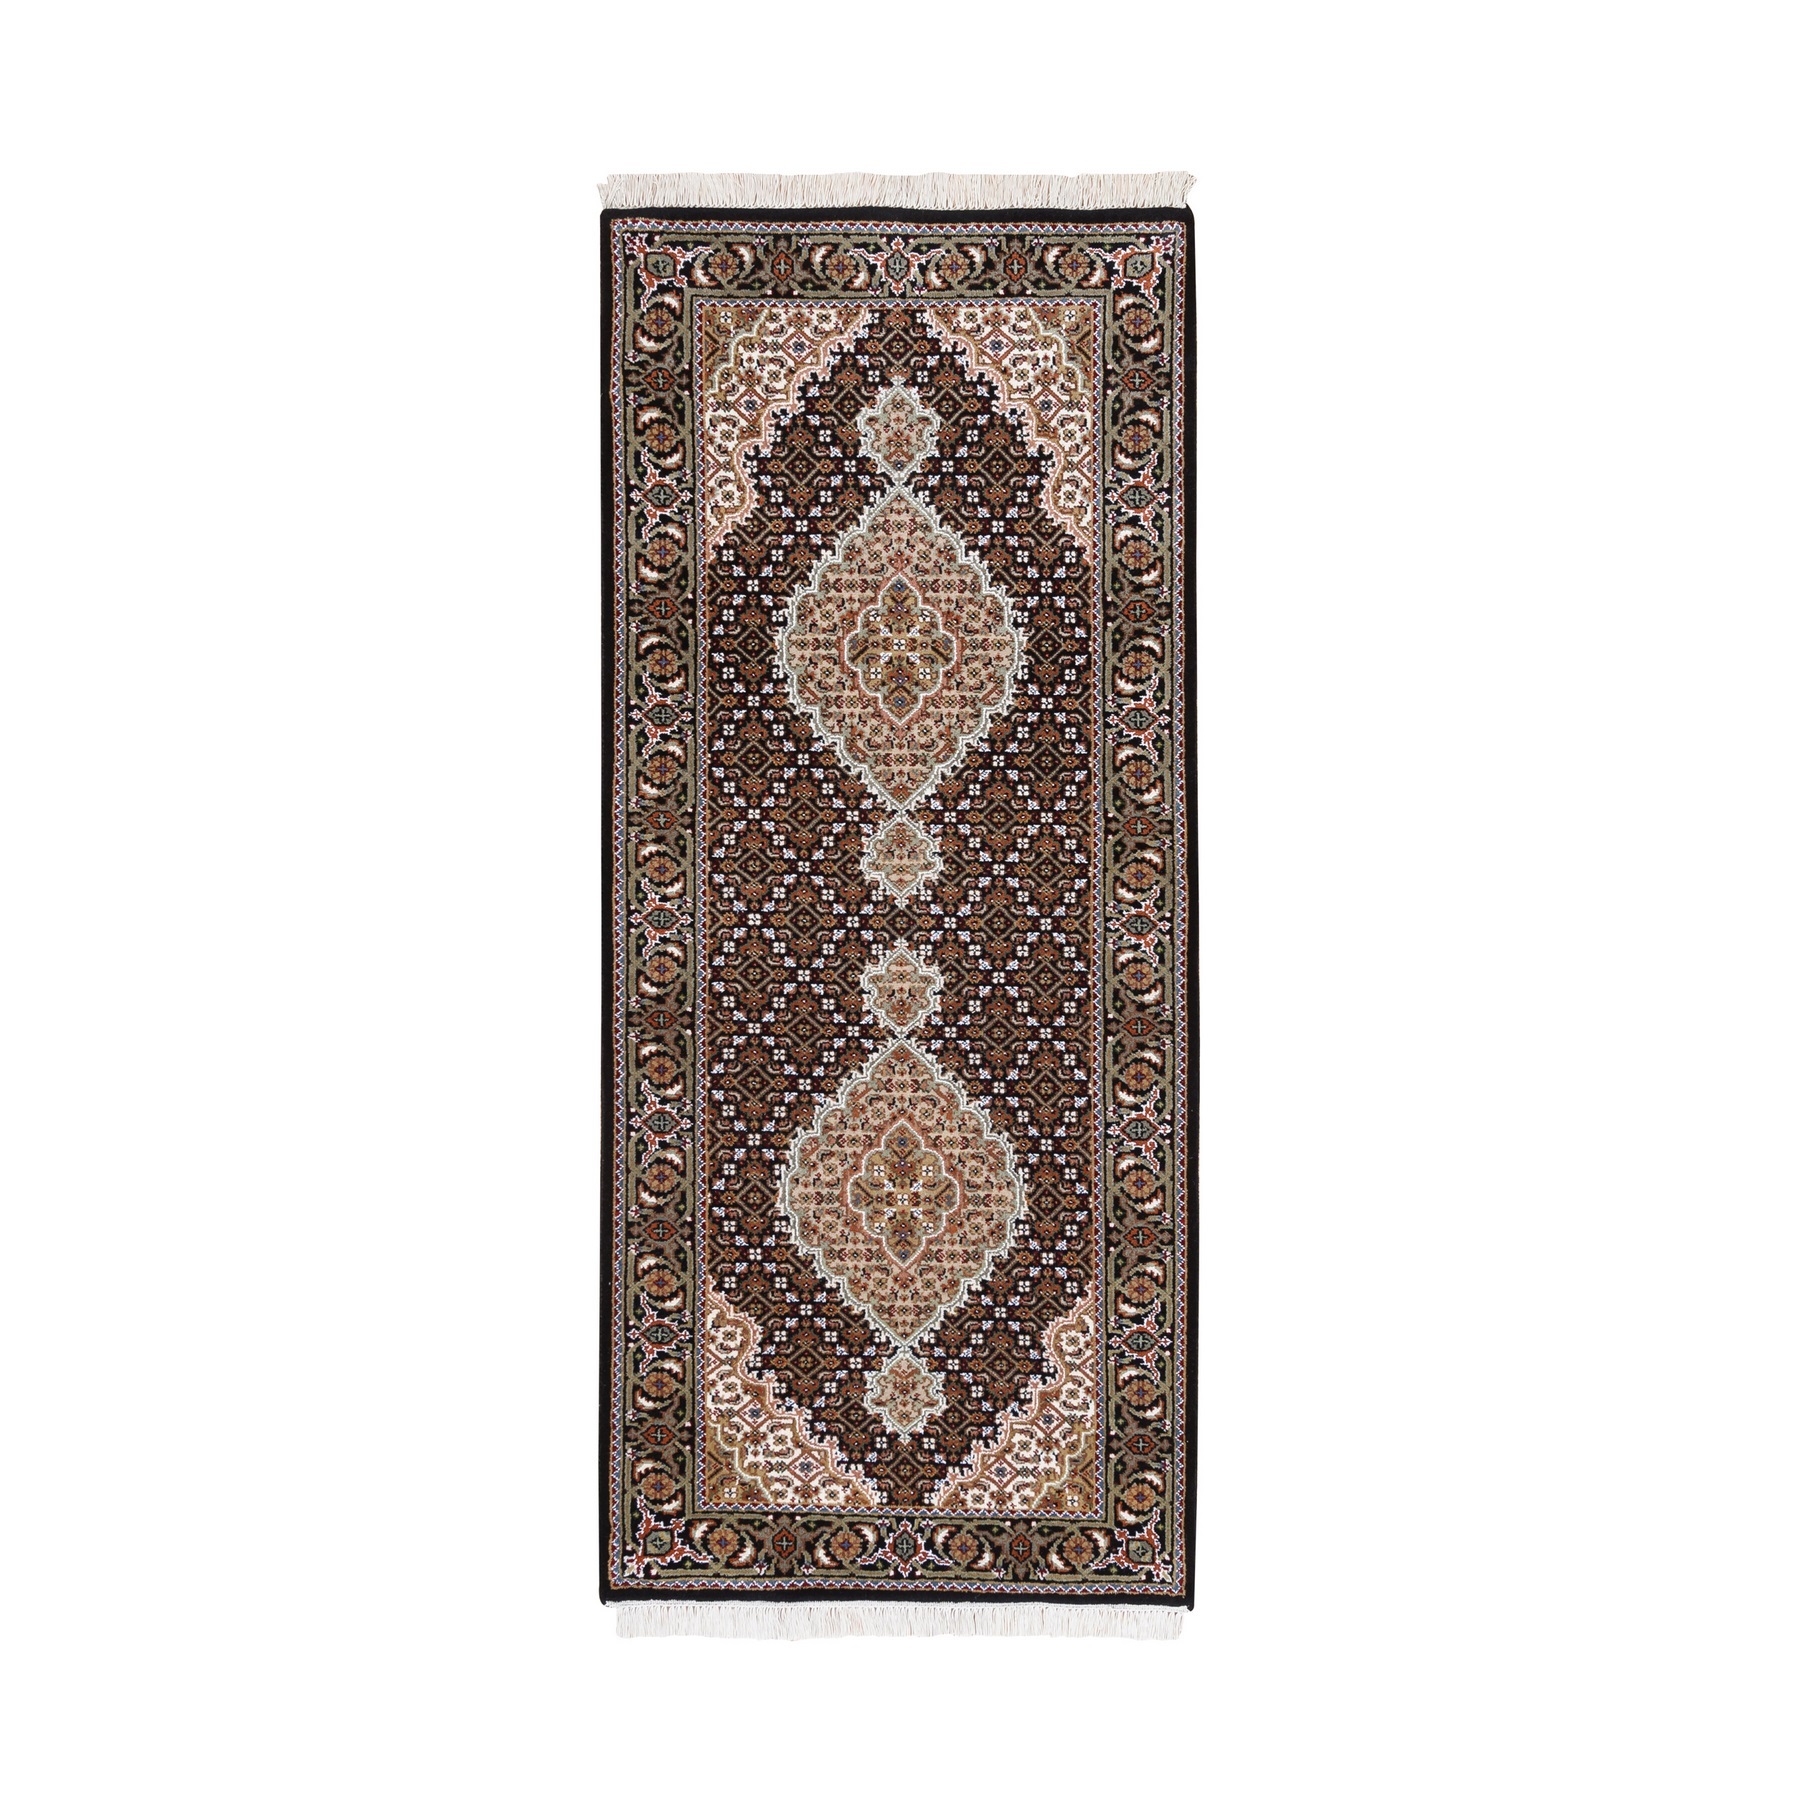 Pirniakan Collection Hand Knotted Black Rug No: 1125042